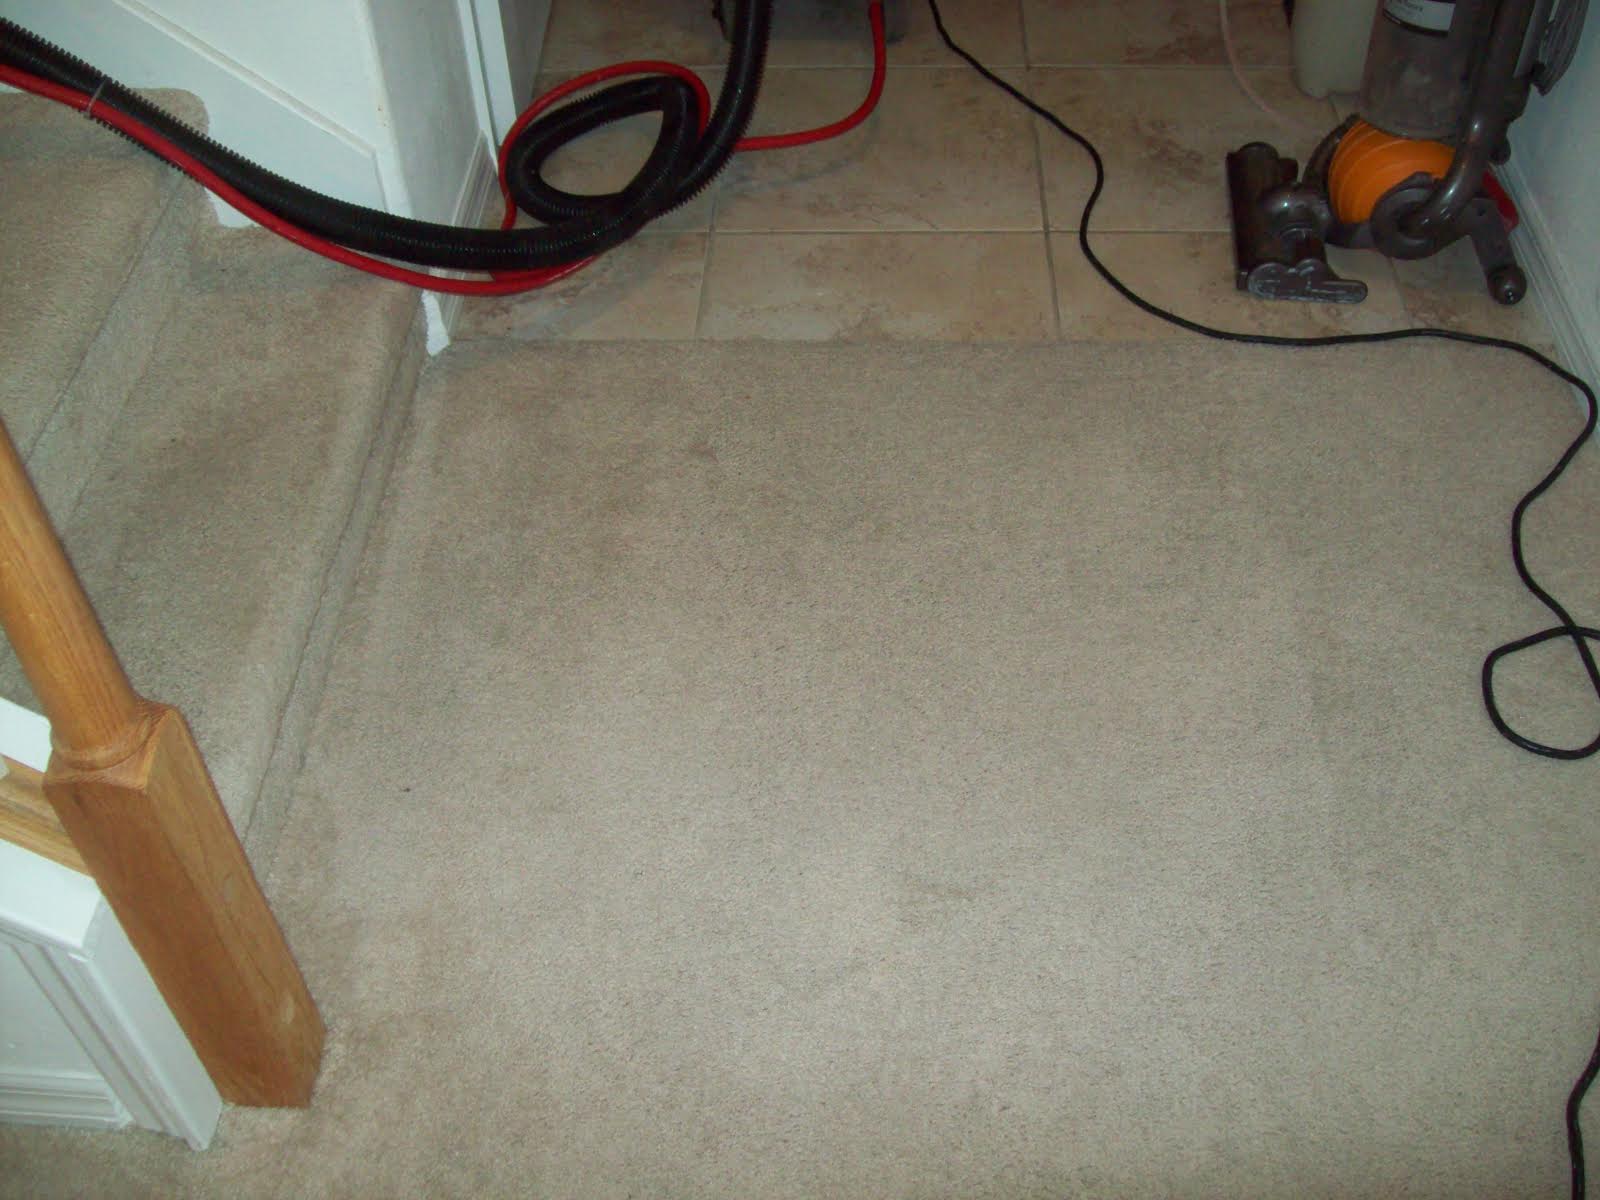 What Your Carpet Cleaner May Not Be Doing